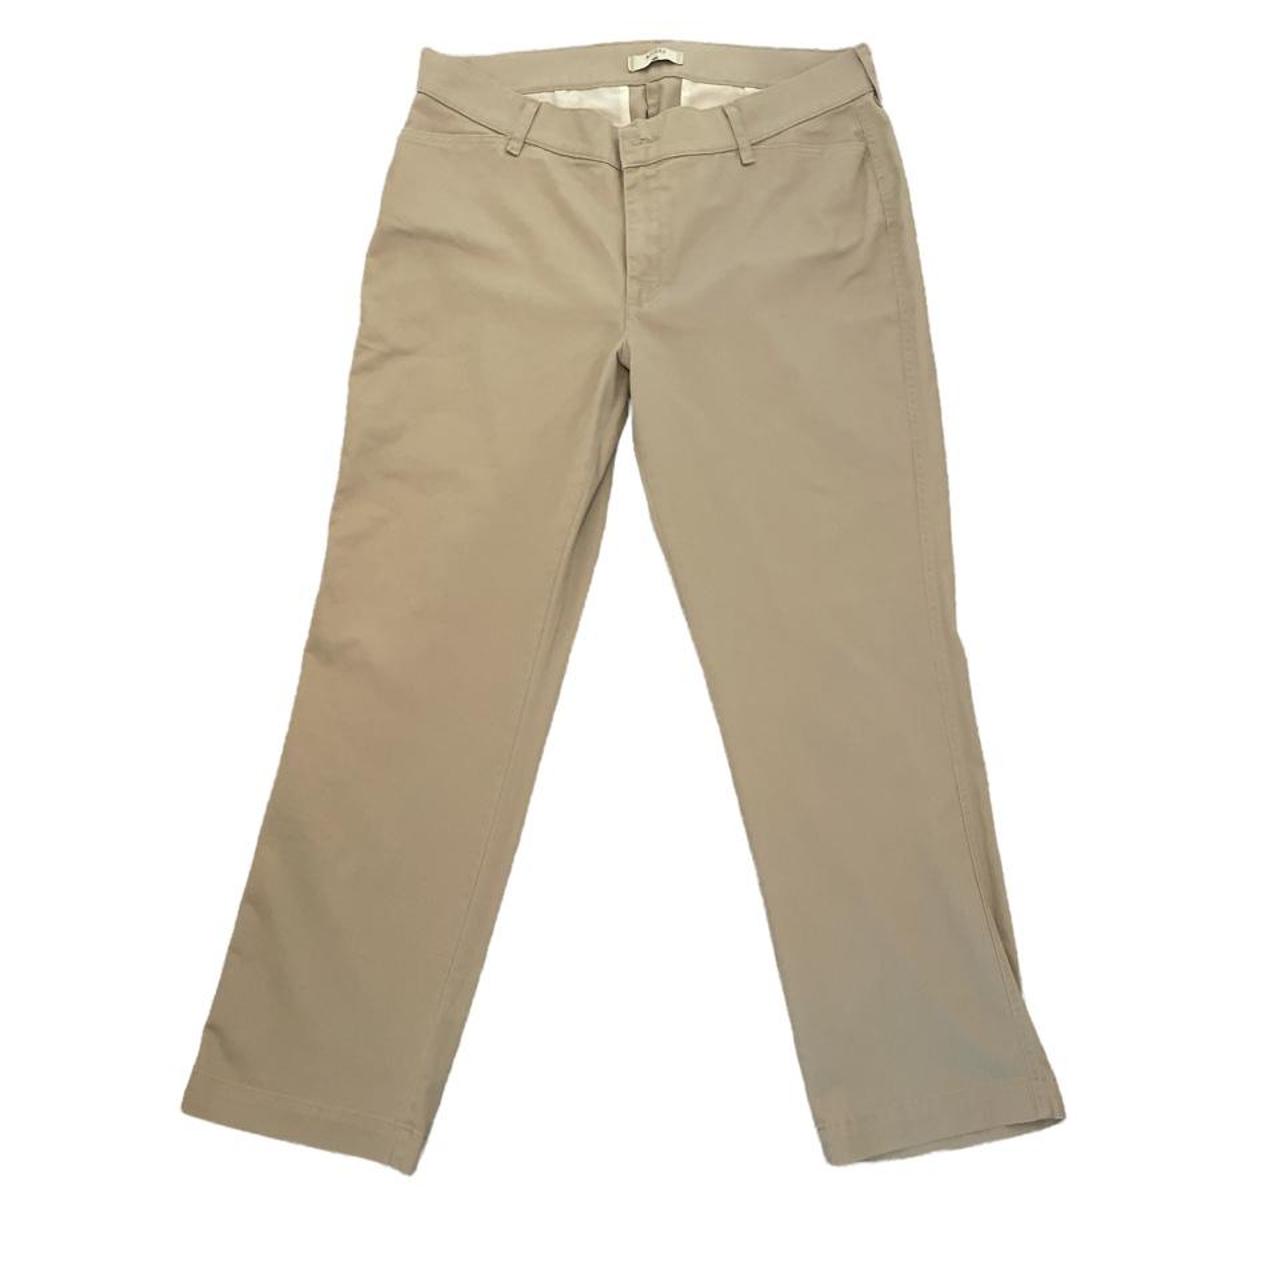 LEE Riders Easy Care Women's Chinos > Size - W- 36